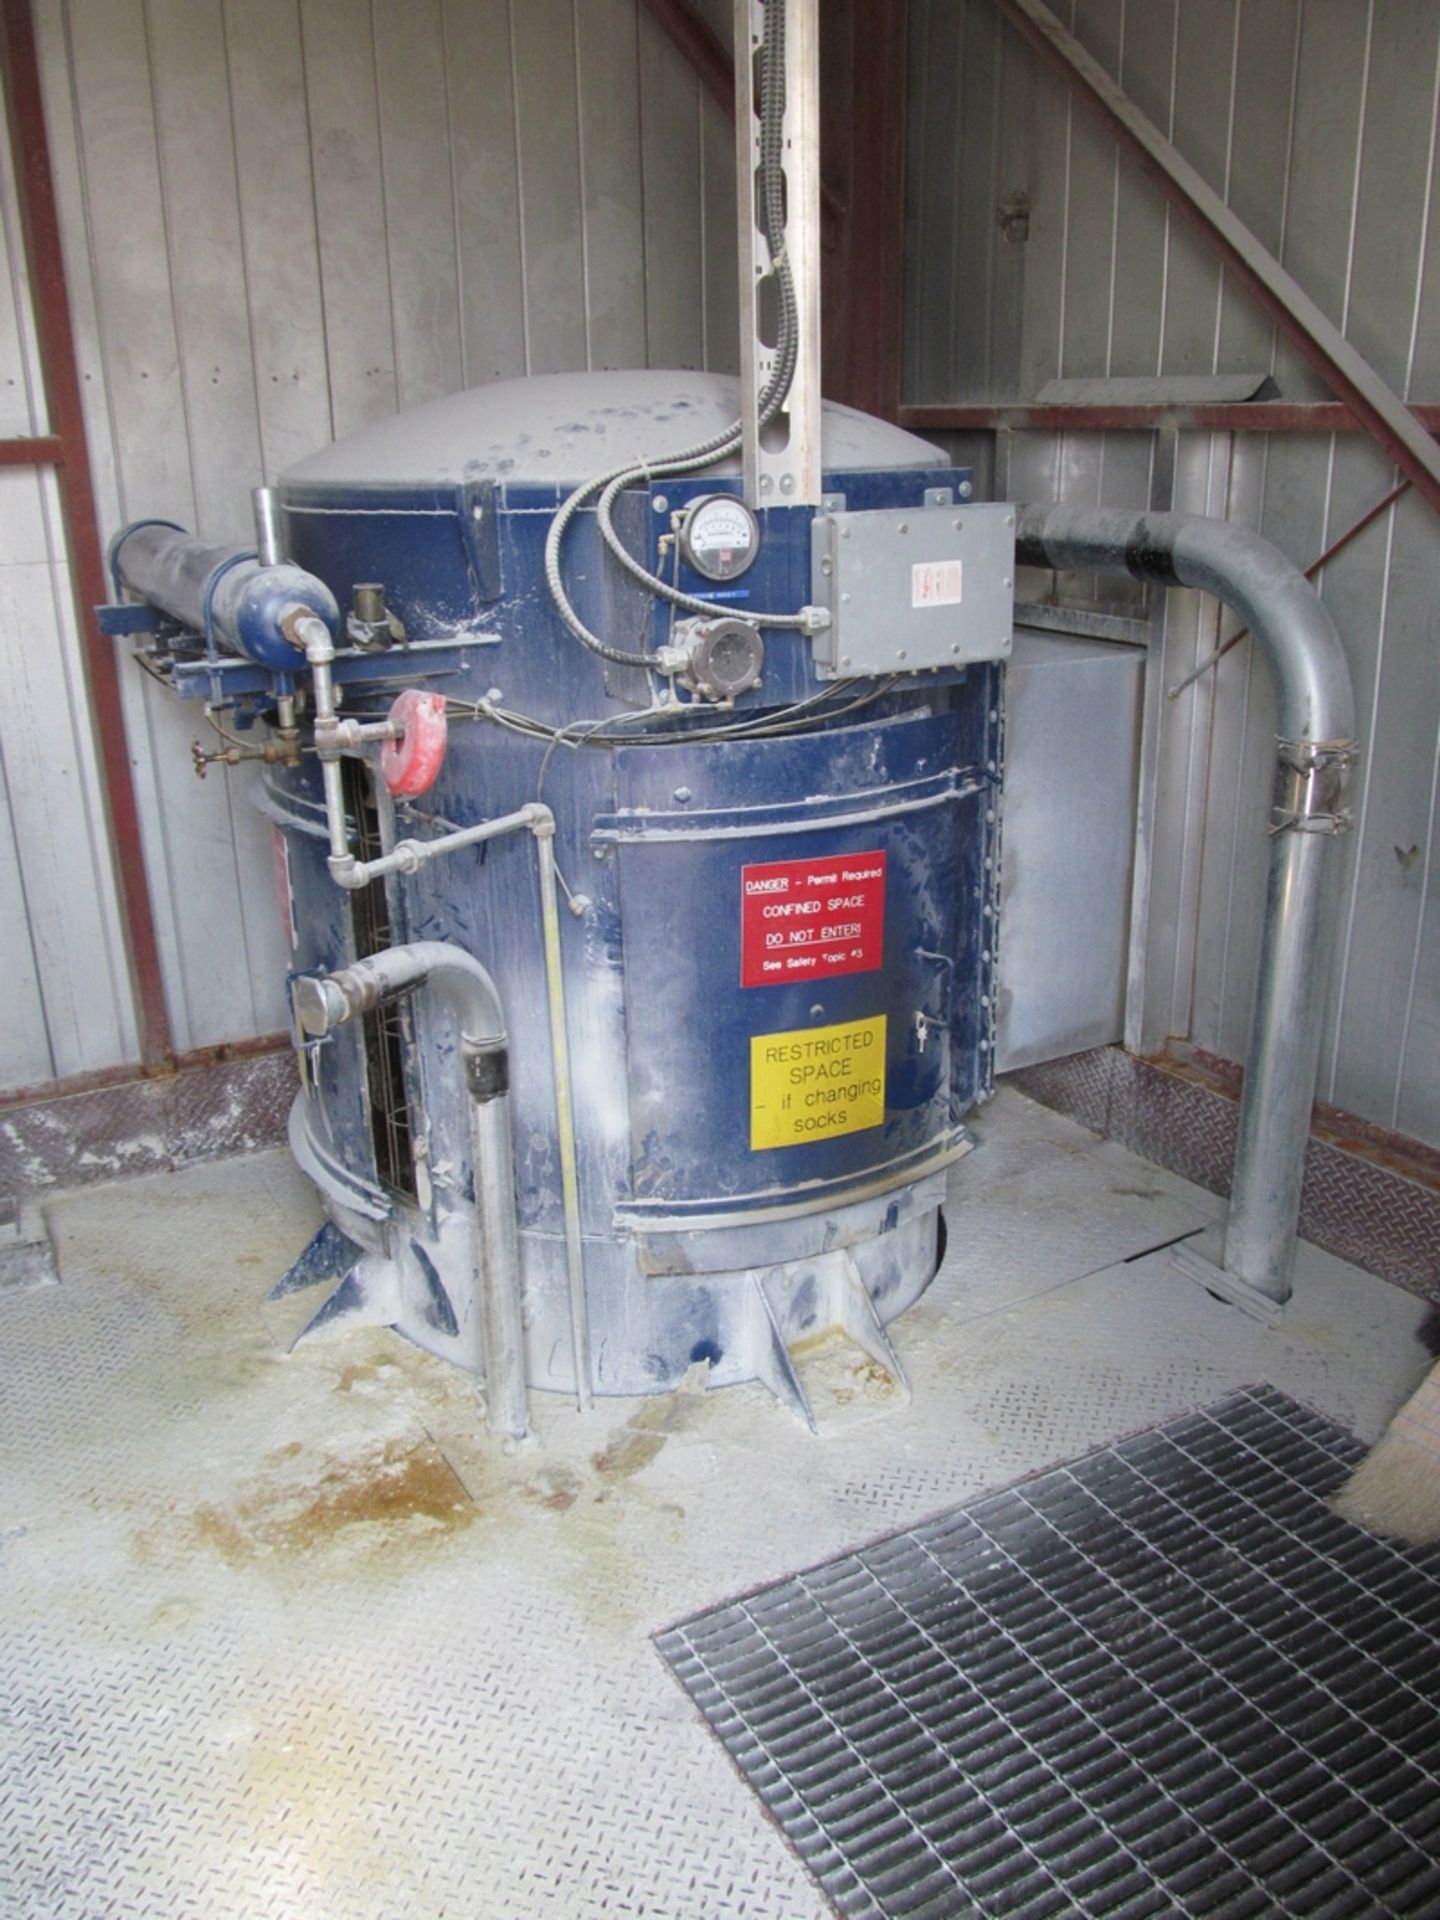 Spencer Turbine Pulse Jet Dust Collector; Carbon Steel. Top access doors. Bottom product outlet,